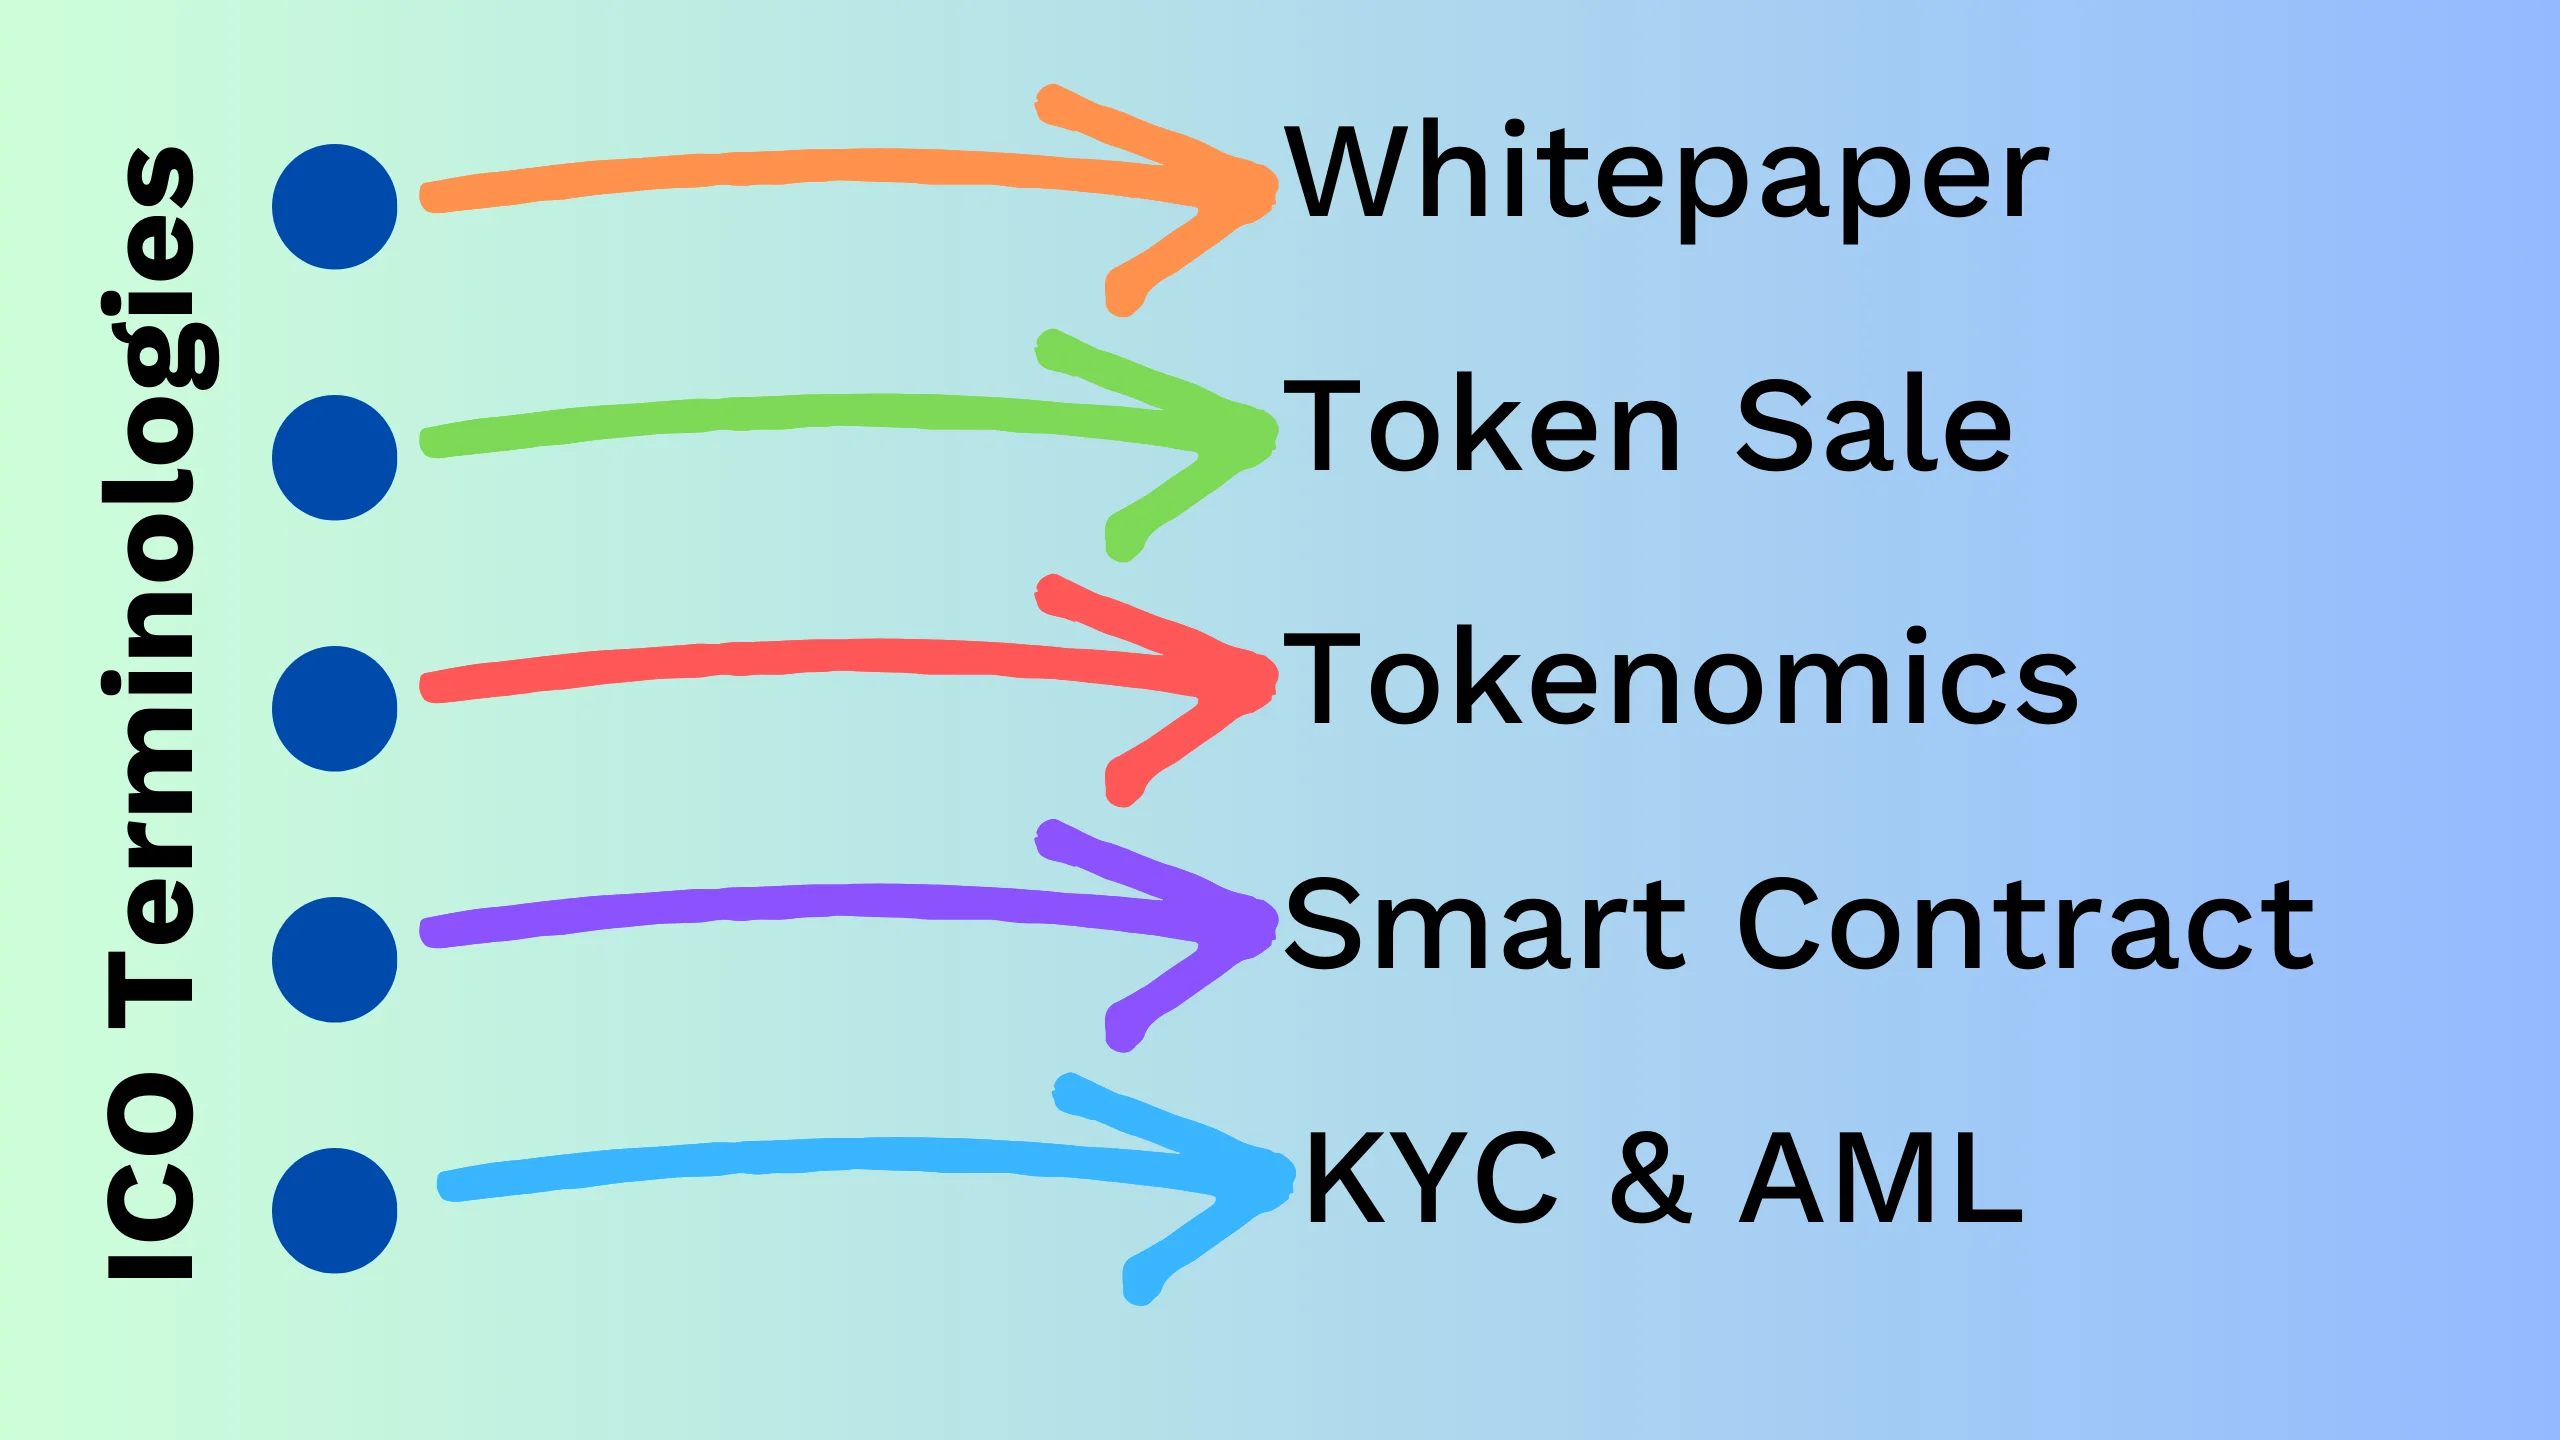 Key ICO Terminologies: Token, Smart Contract, Whitepaper, and Blockchain. Essential terms used in Initial Coin Offerings explained.